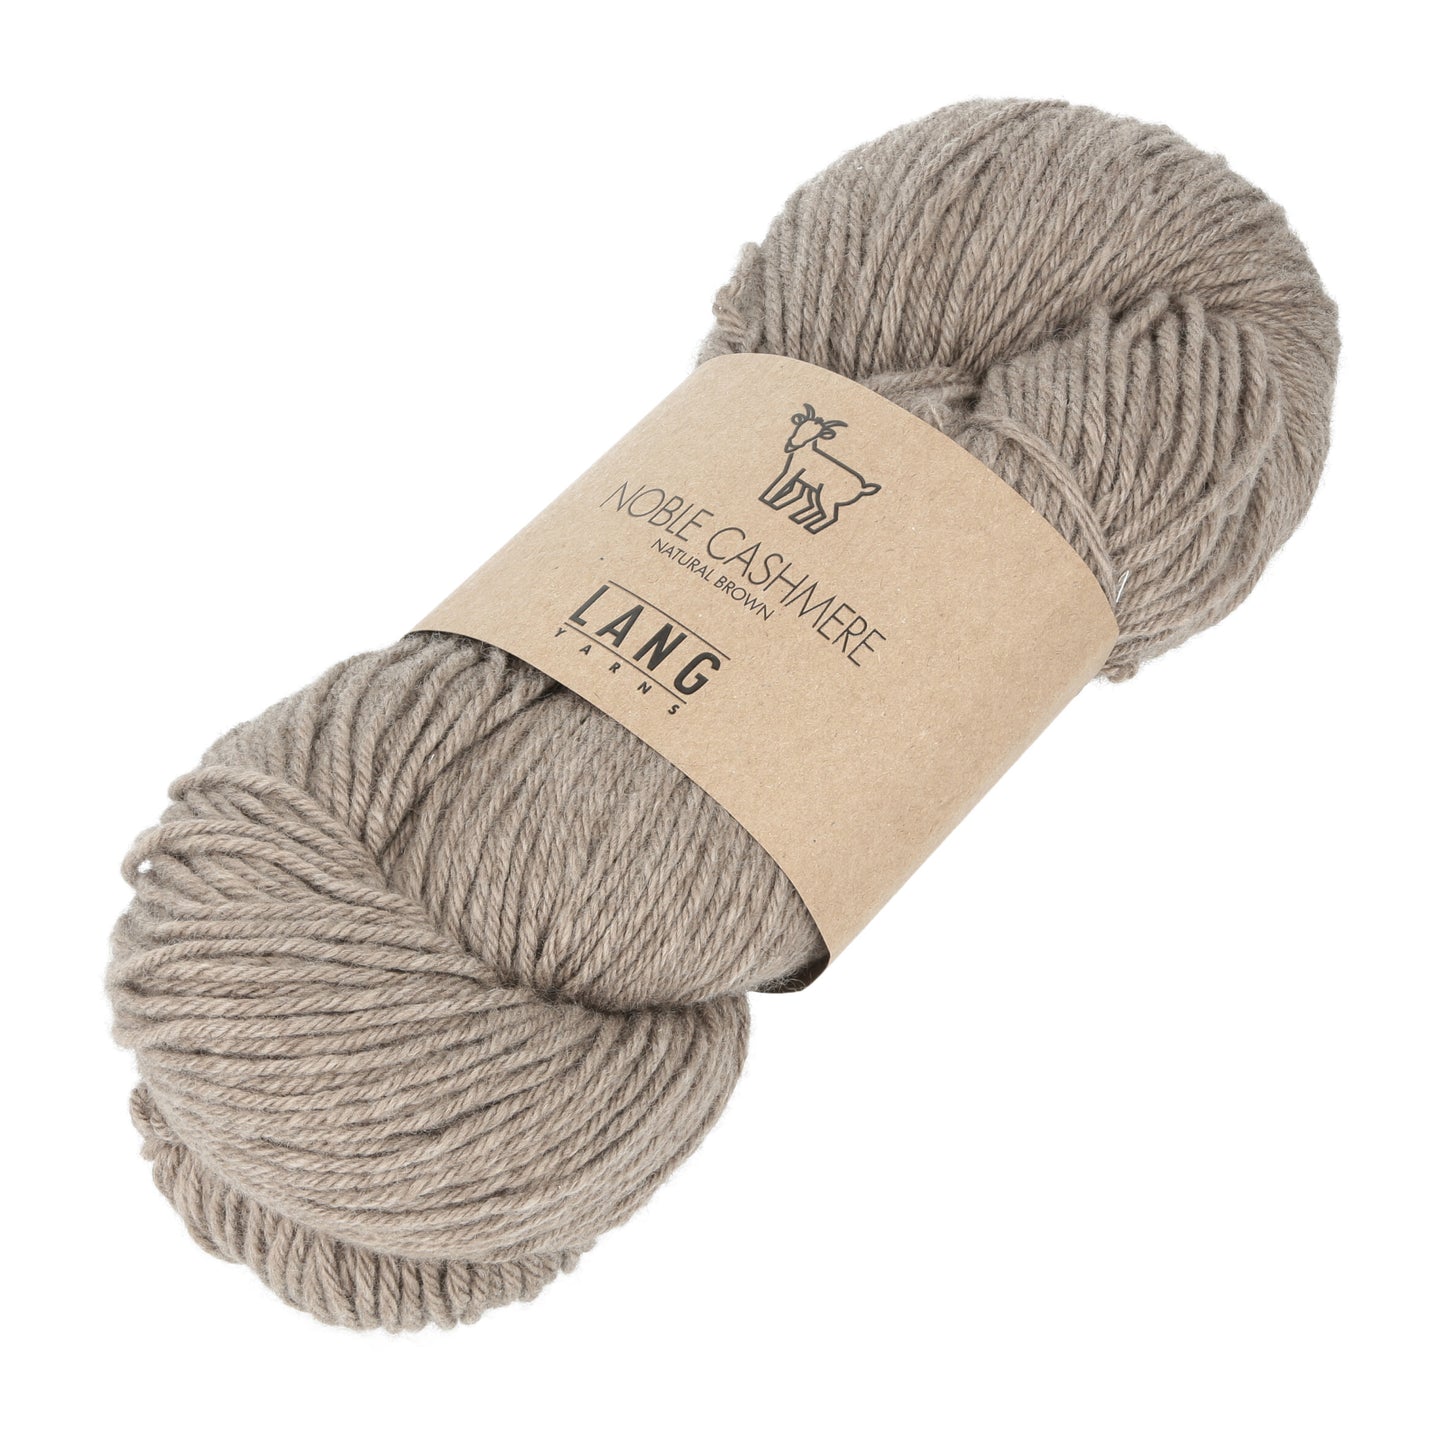 Cashmere wool - Noble Cashmere by Lang Yarns - NS 5-5.5 mm